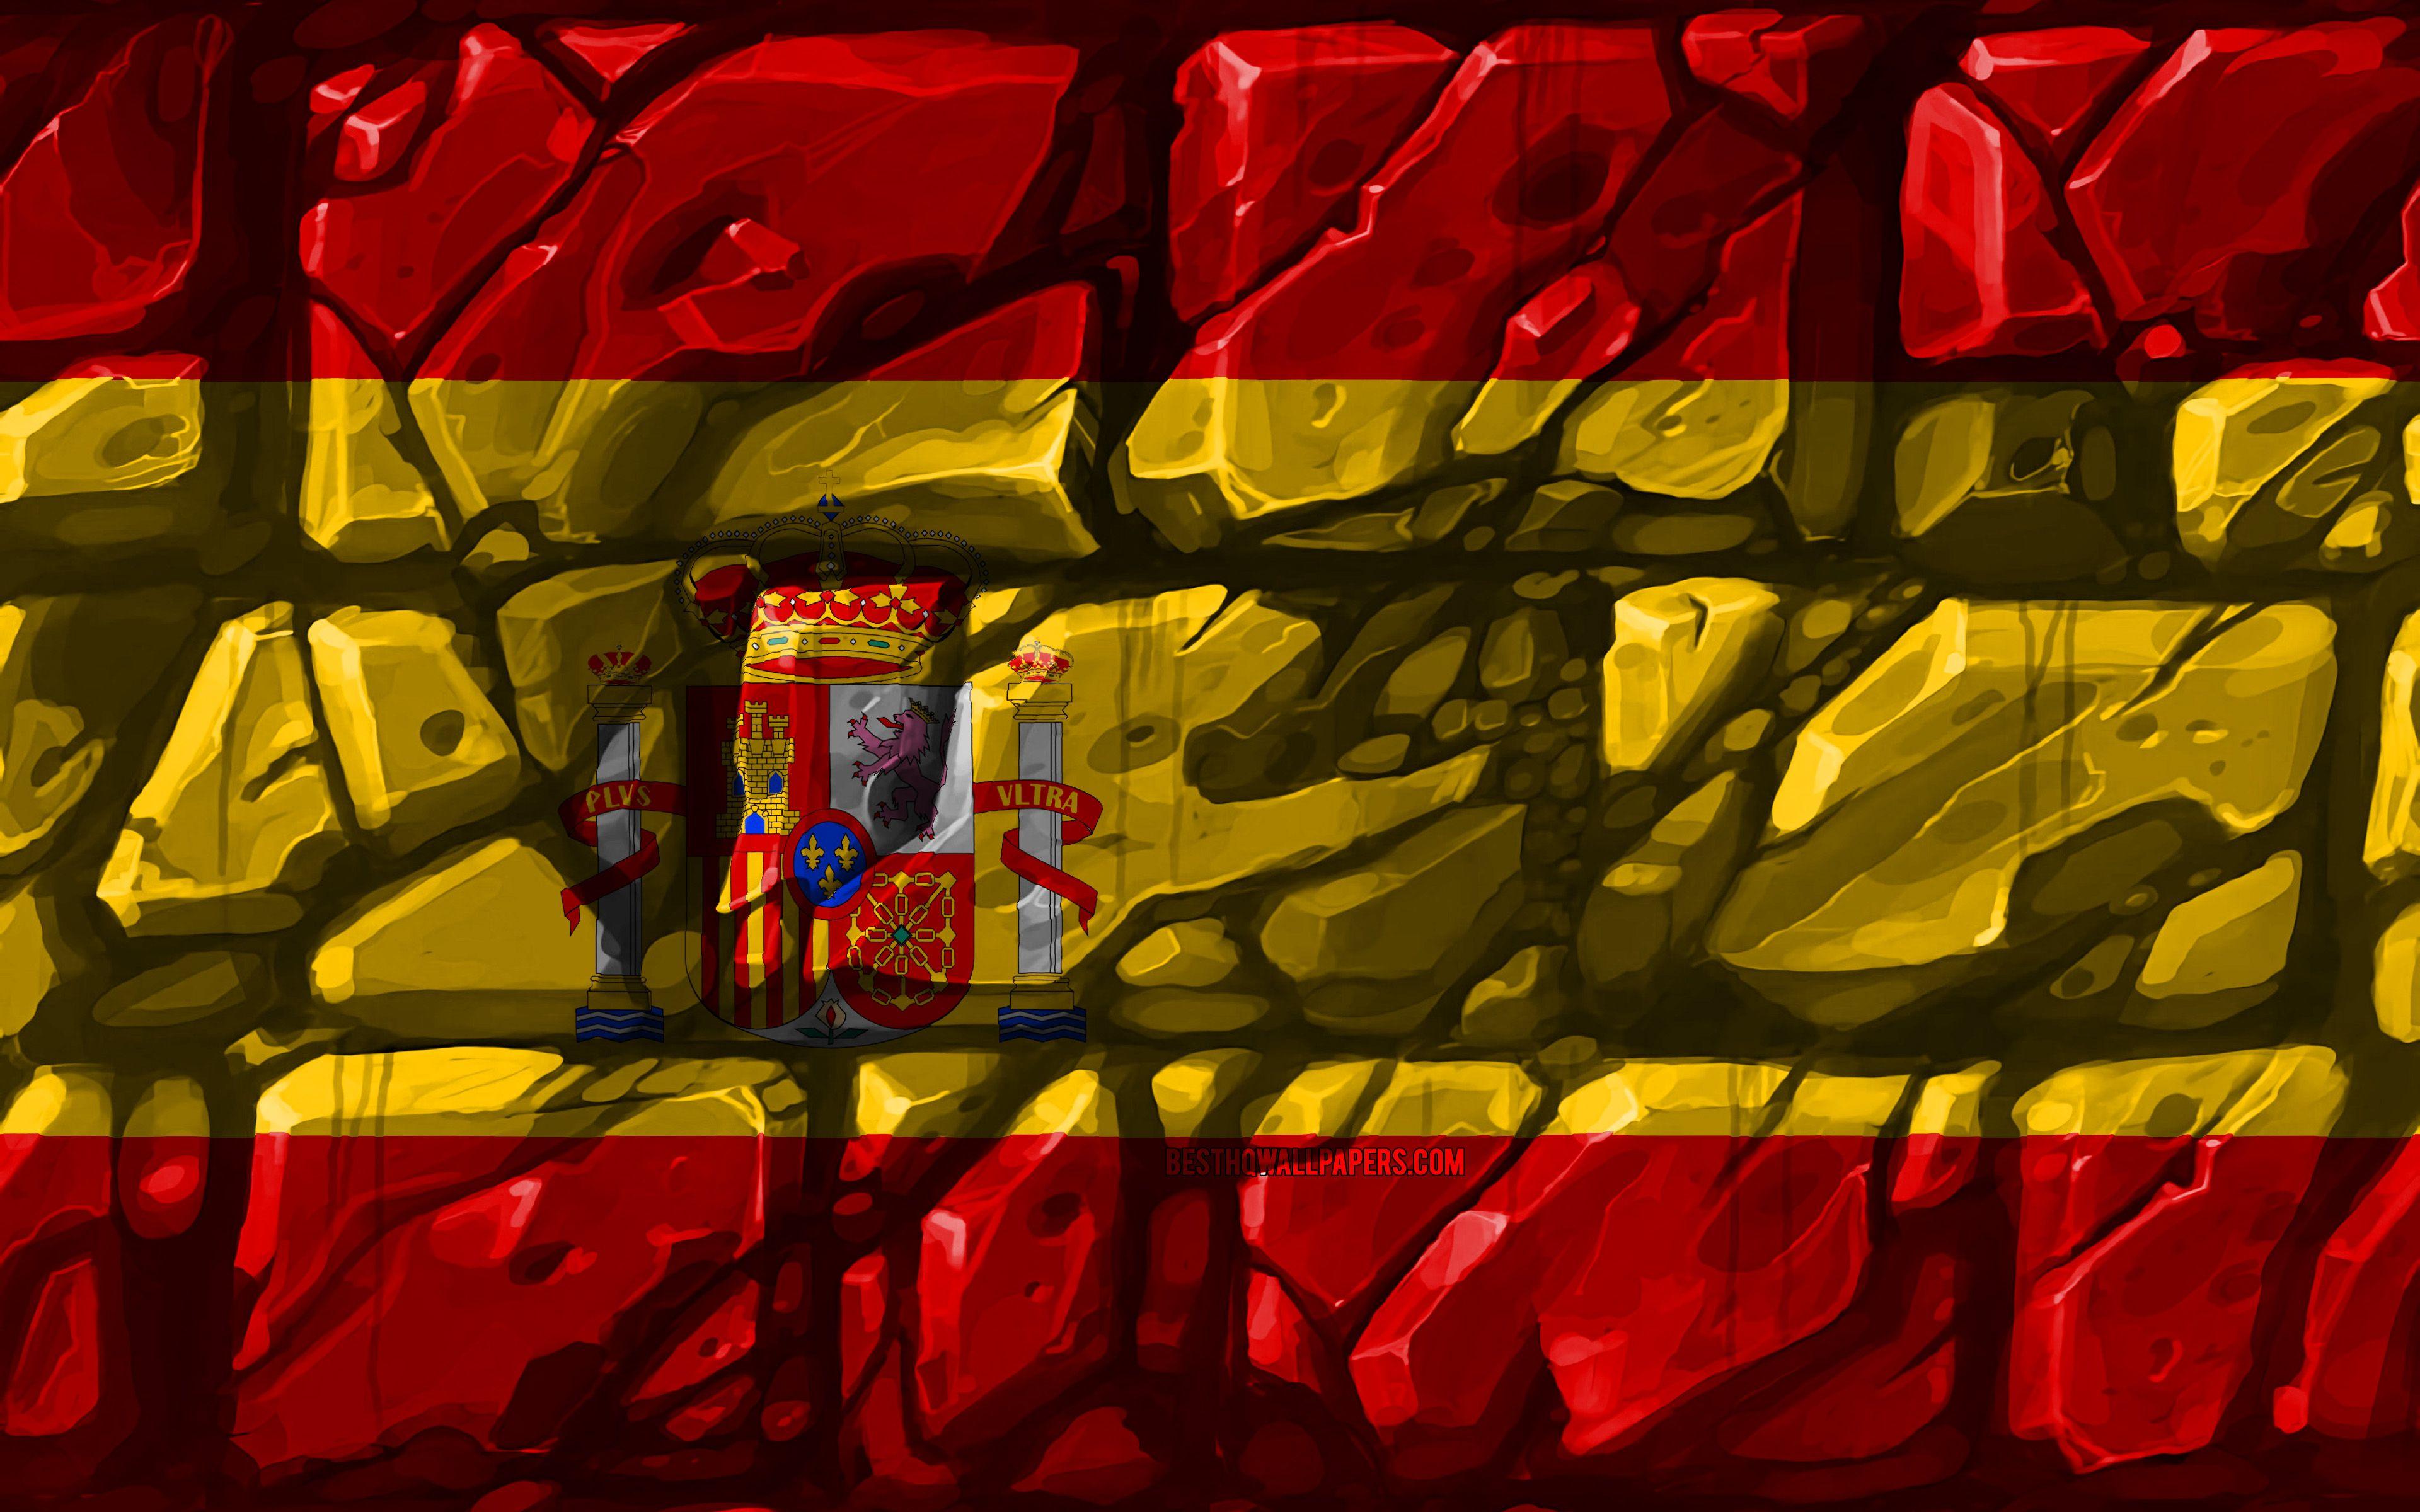 Spain Flag Wallpapers - Top Free Spain Flag Backgrounds - WallpaperAccess